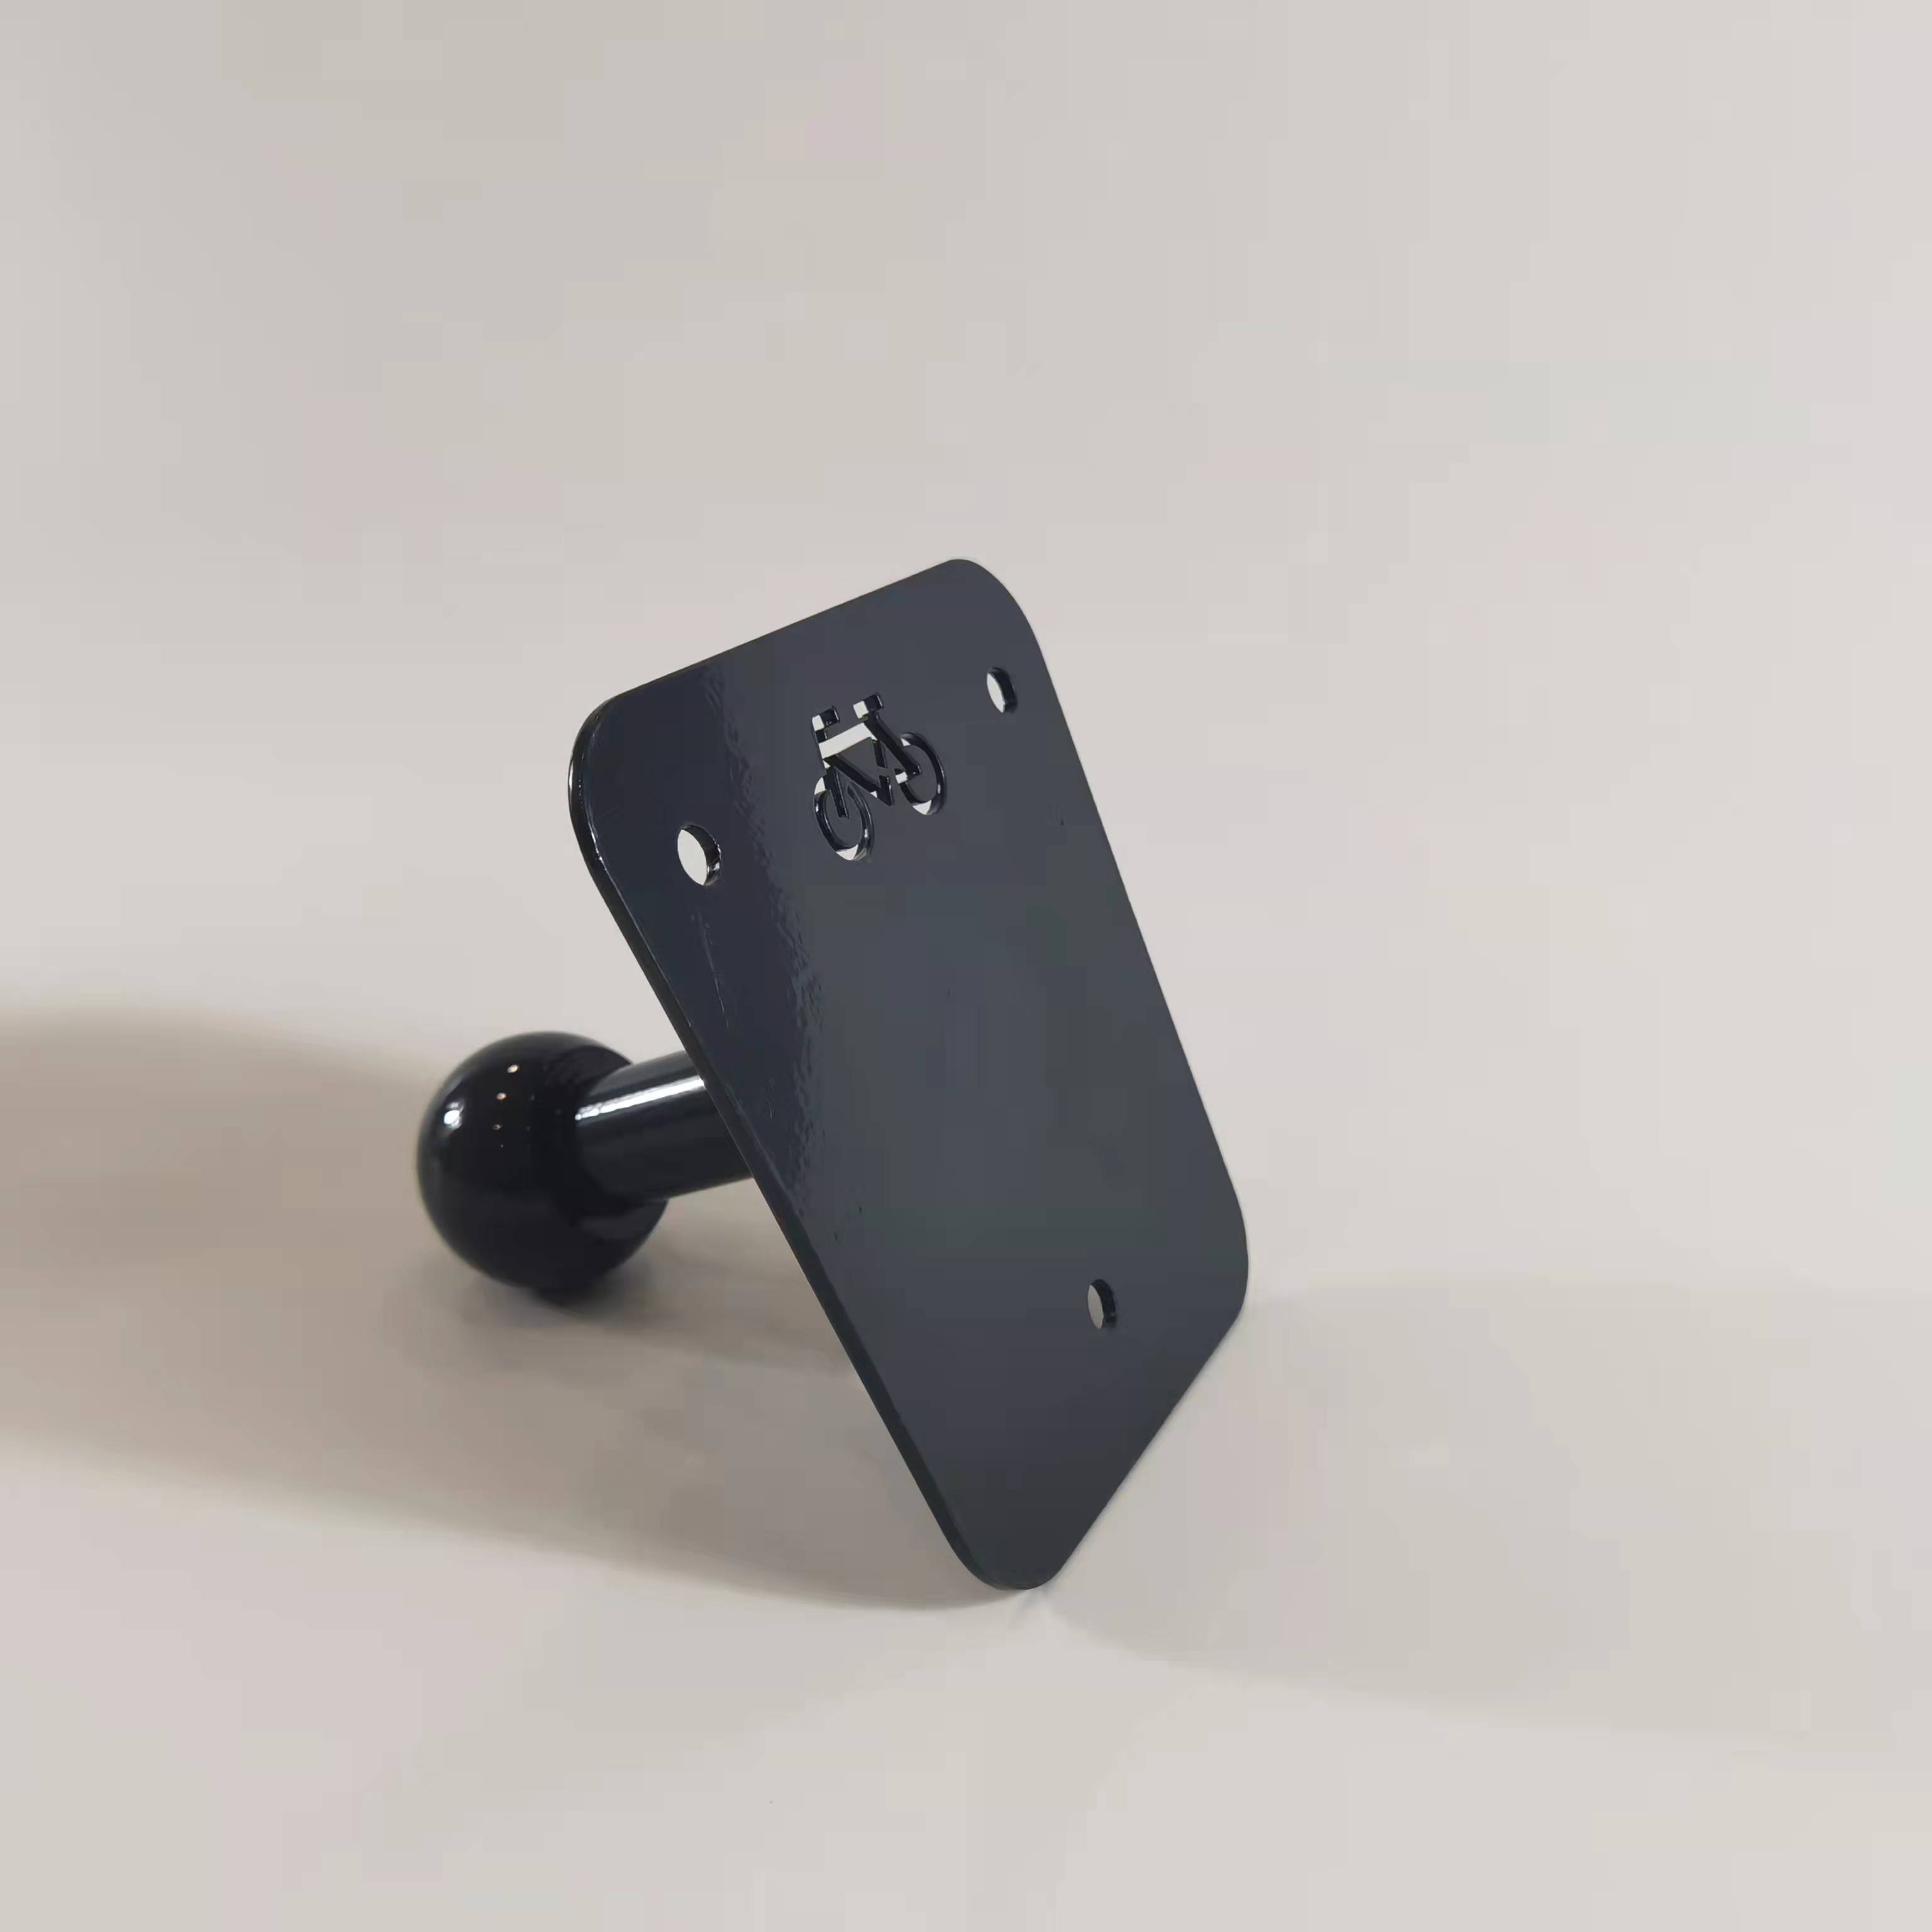 Universal Wall Mount for Bicycle Carrier | Ball Head Bicycle Rear Carrier Wall Bracket | wall mount